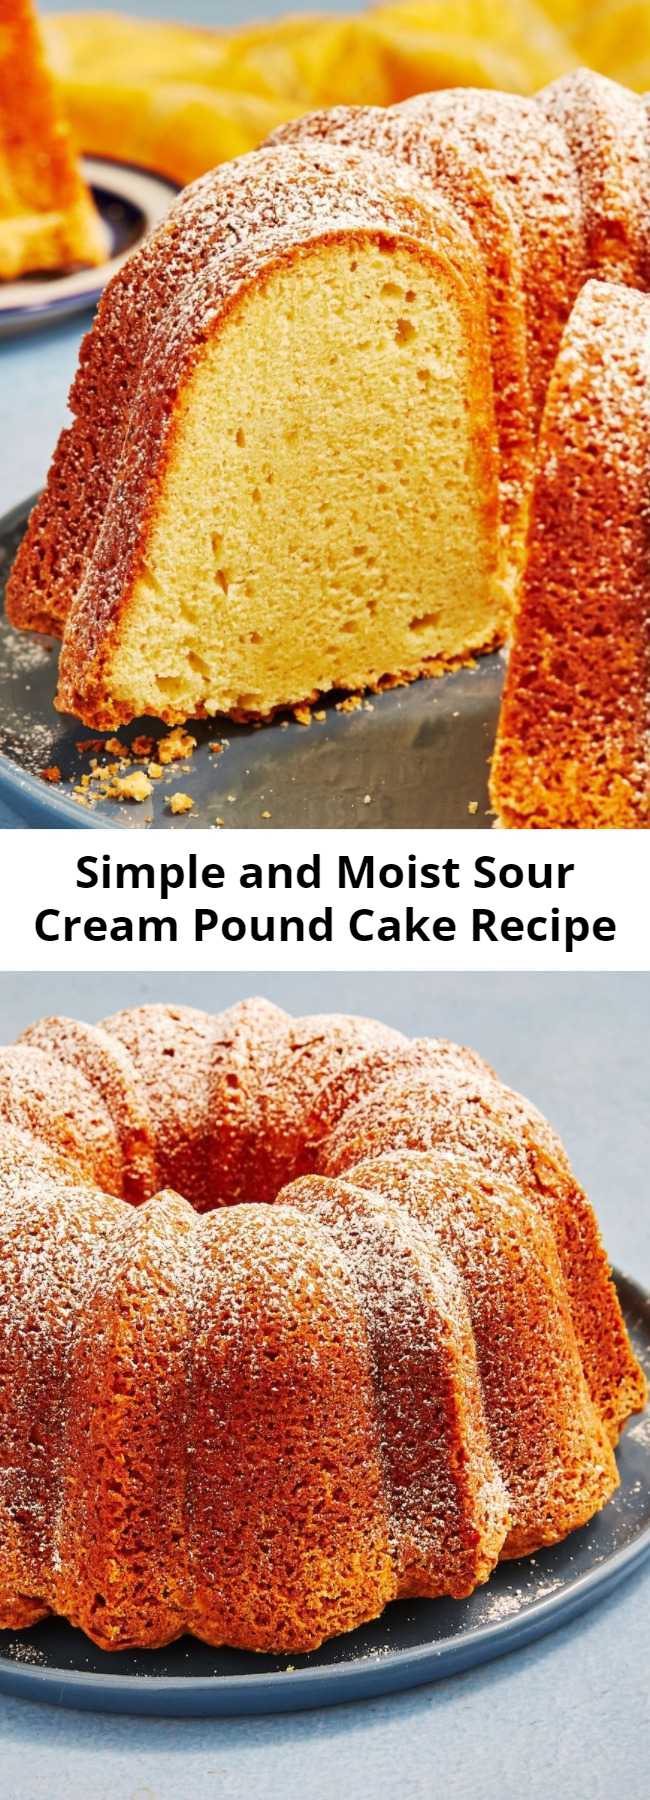 Simple and Moist Sour Cream Pound Cake Recipe - Sour Cream Pound Cake is a humble cake that's beautiful and delicious enough to be a dessert centerpiece any time of day.